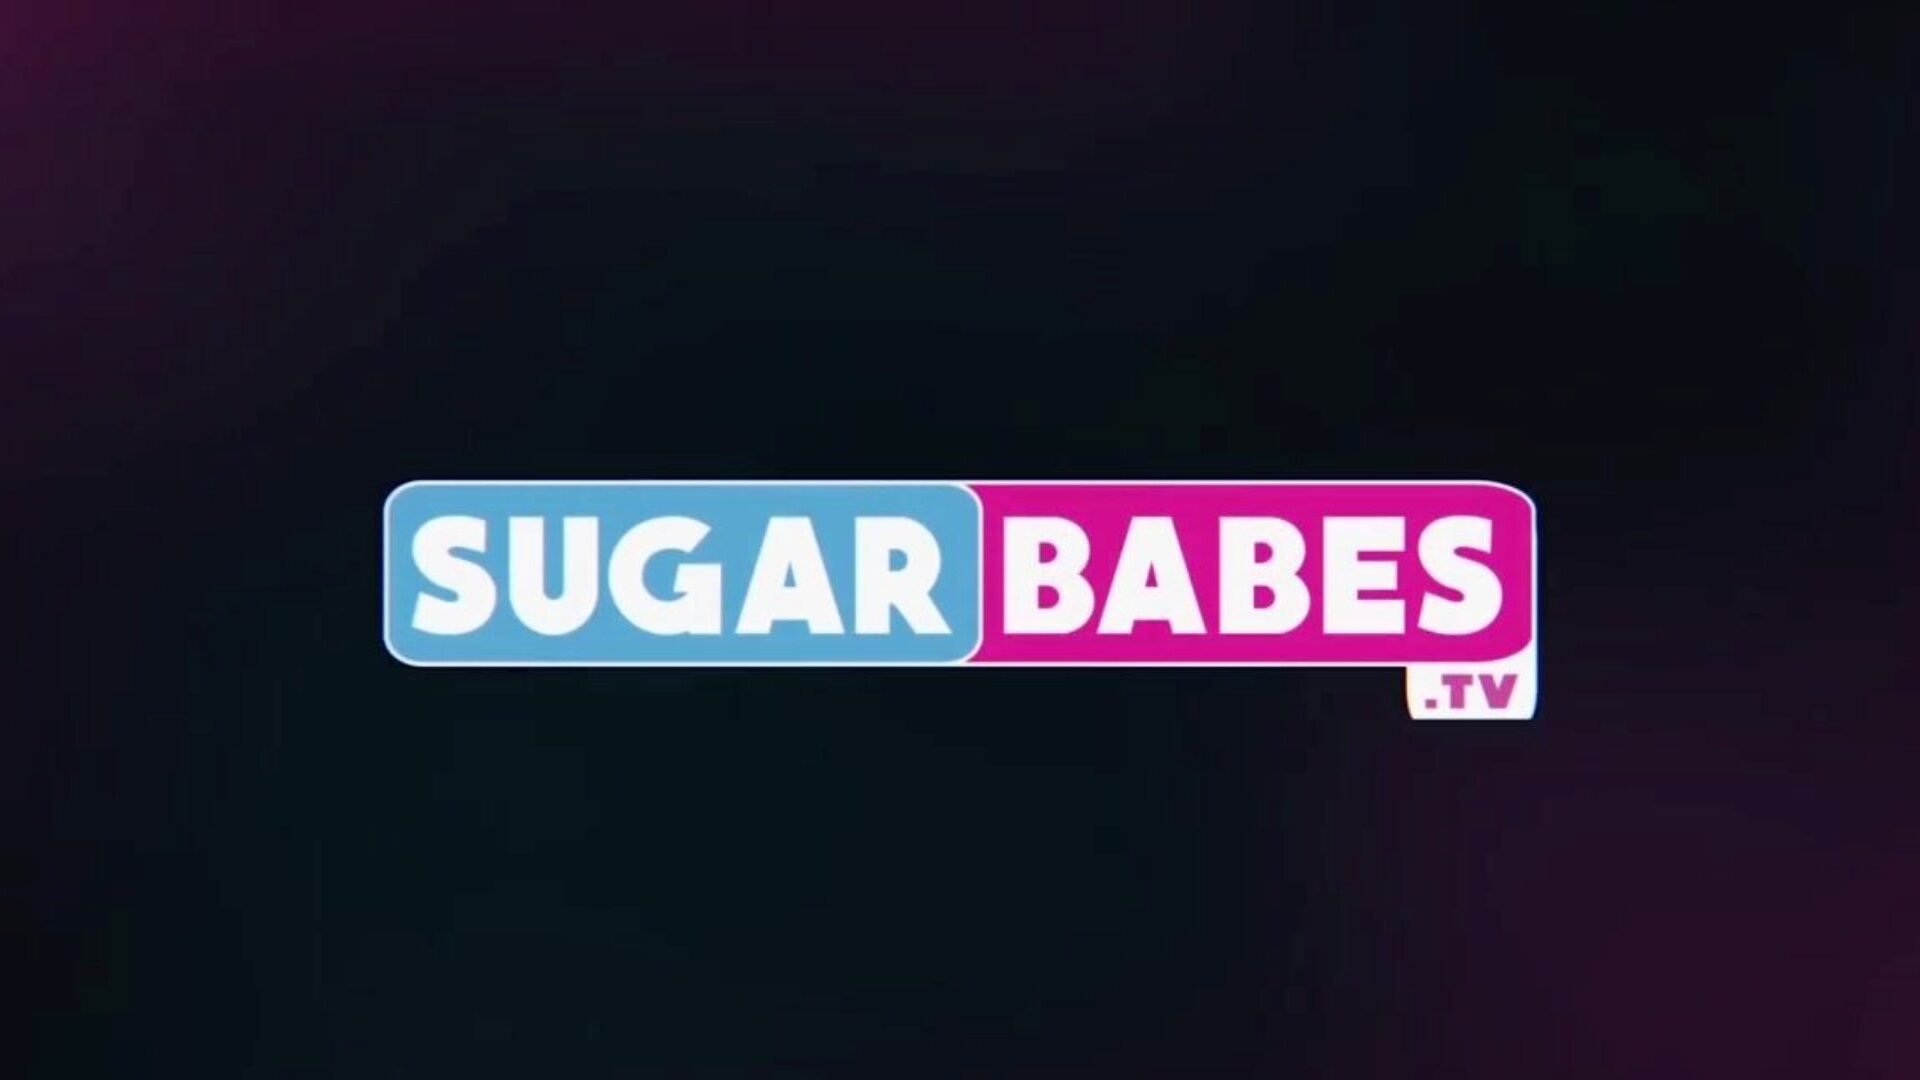 Sugarbabestv the Bottle, Free Sugar honeys TV HD Porn 6b Watch Sugarbabestv the Bottle video on xHamster, the finest HD lovemaking tube web site with tons of free Sugar babes TV Lesbian Sex & Love pornography vids